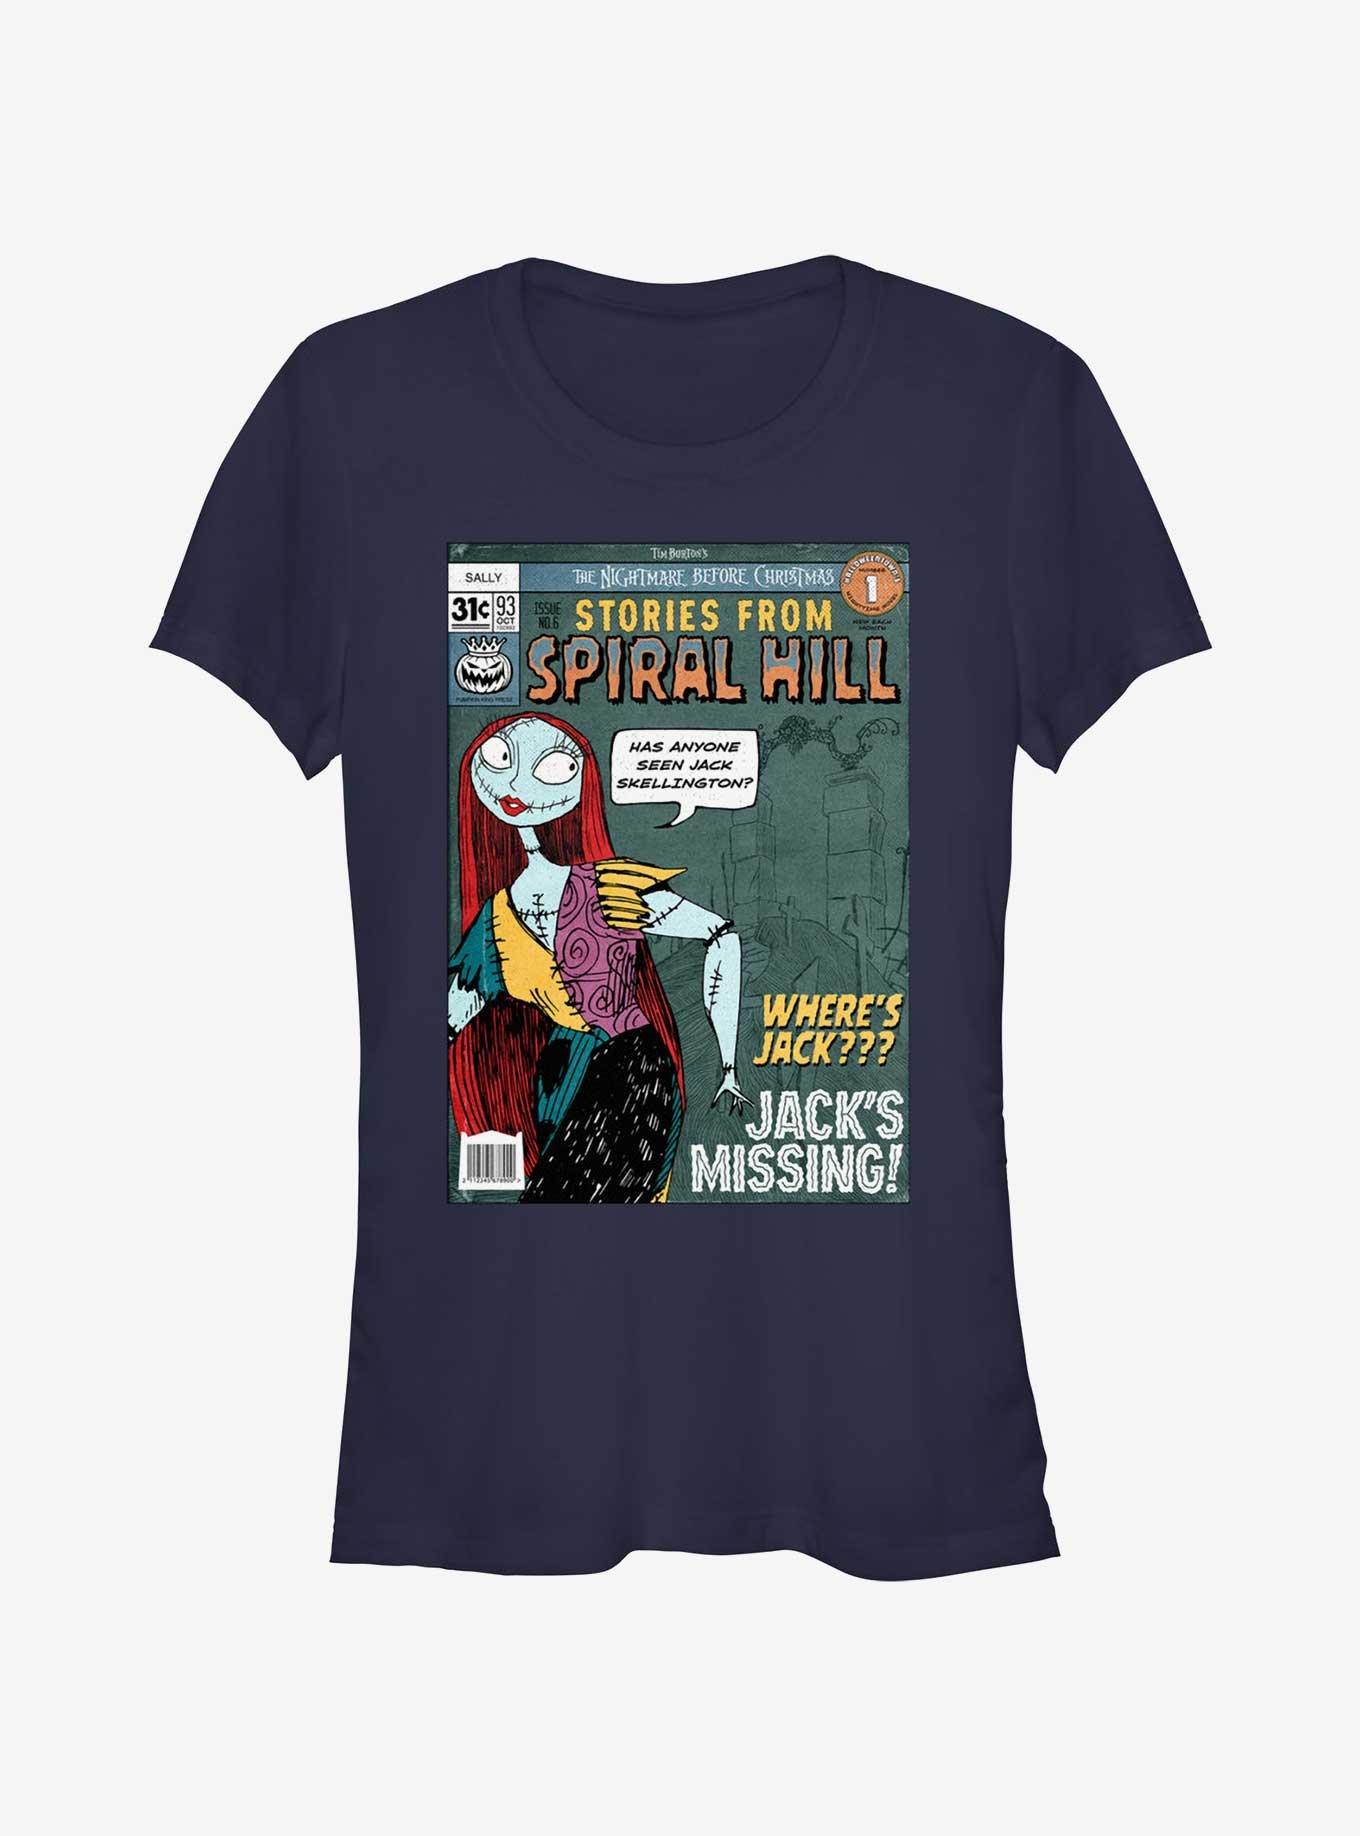 Disney The Nightmare Before Christmas Stories From Spiral Hill Sally Girls T-Shirt, NAVY, hi-res